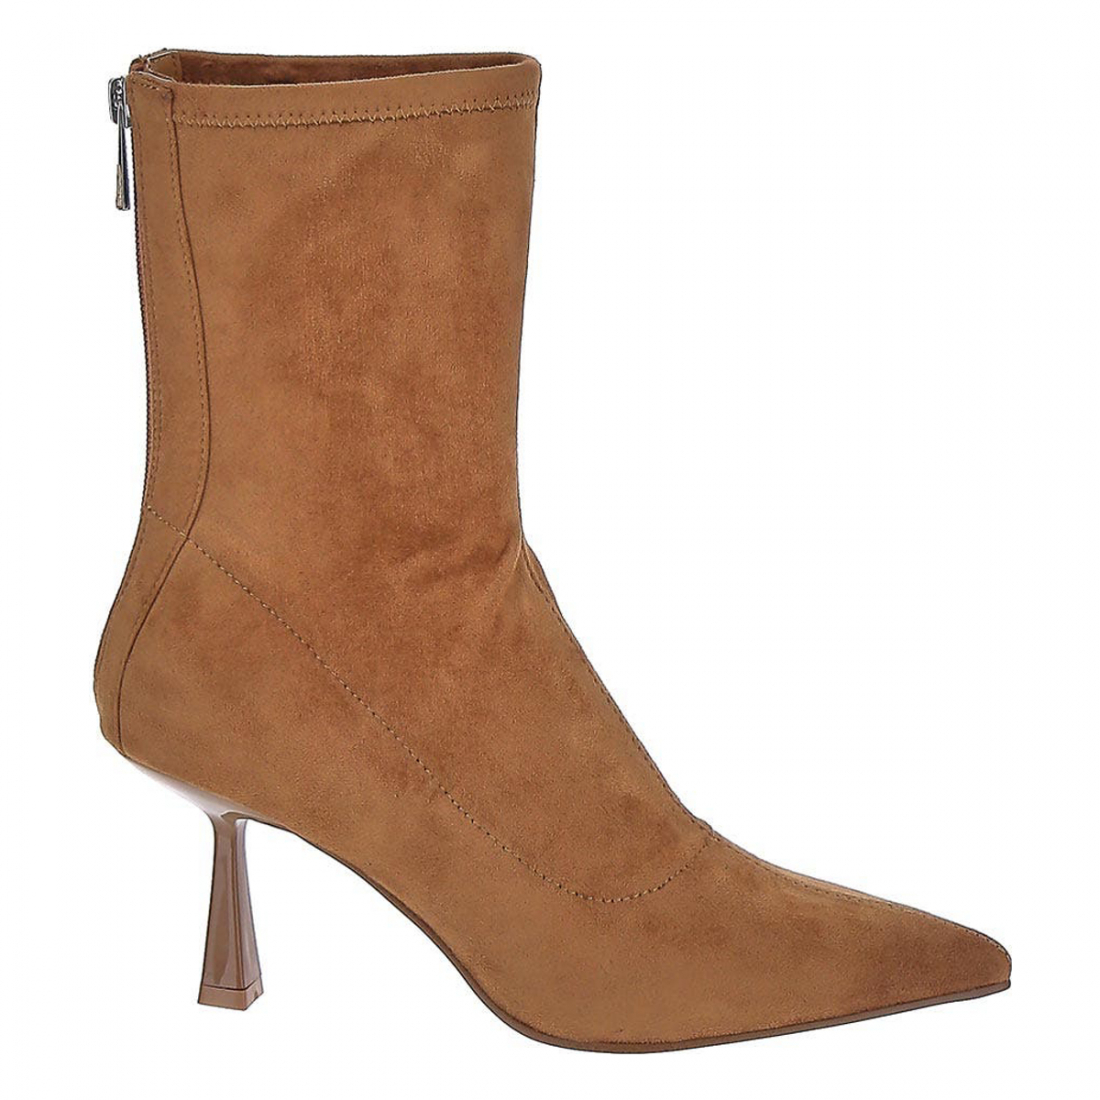 Women's 'Janeth' Ankle Boots